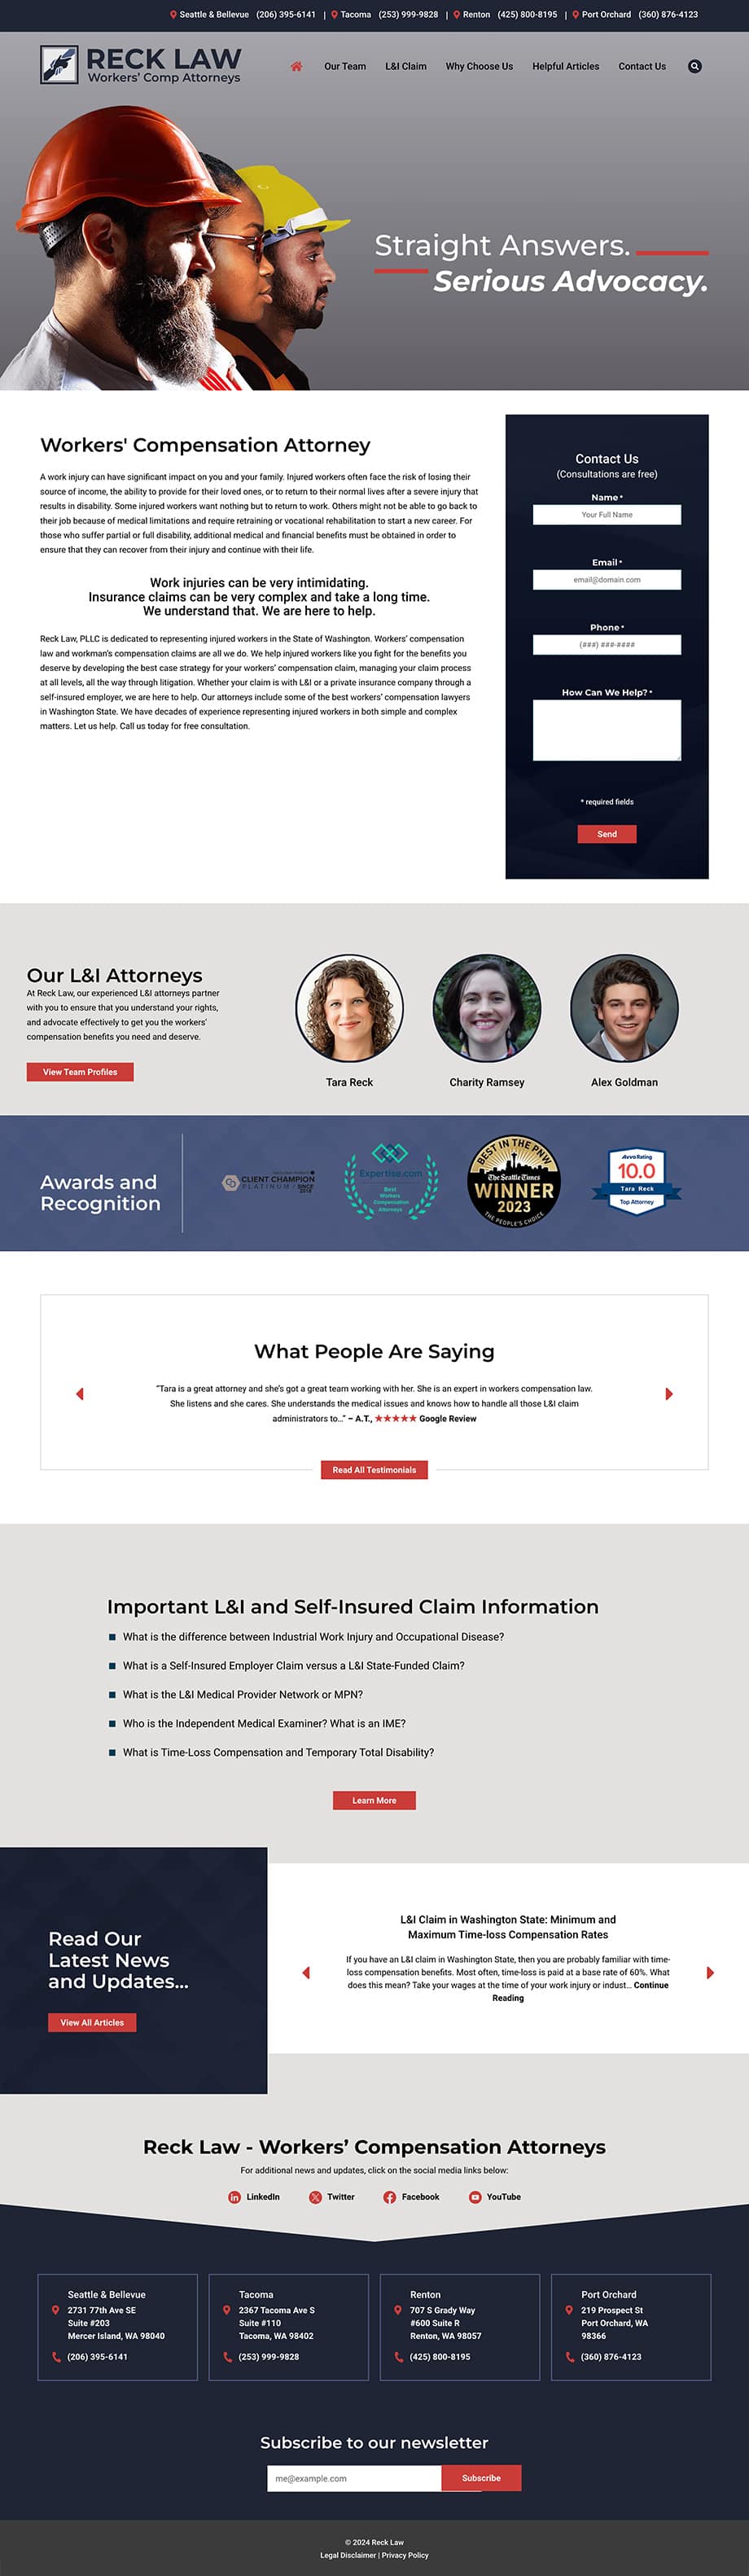 Law Firm Website Design for Reck Law